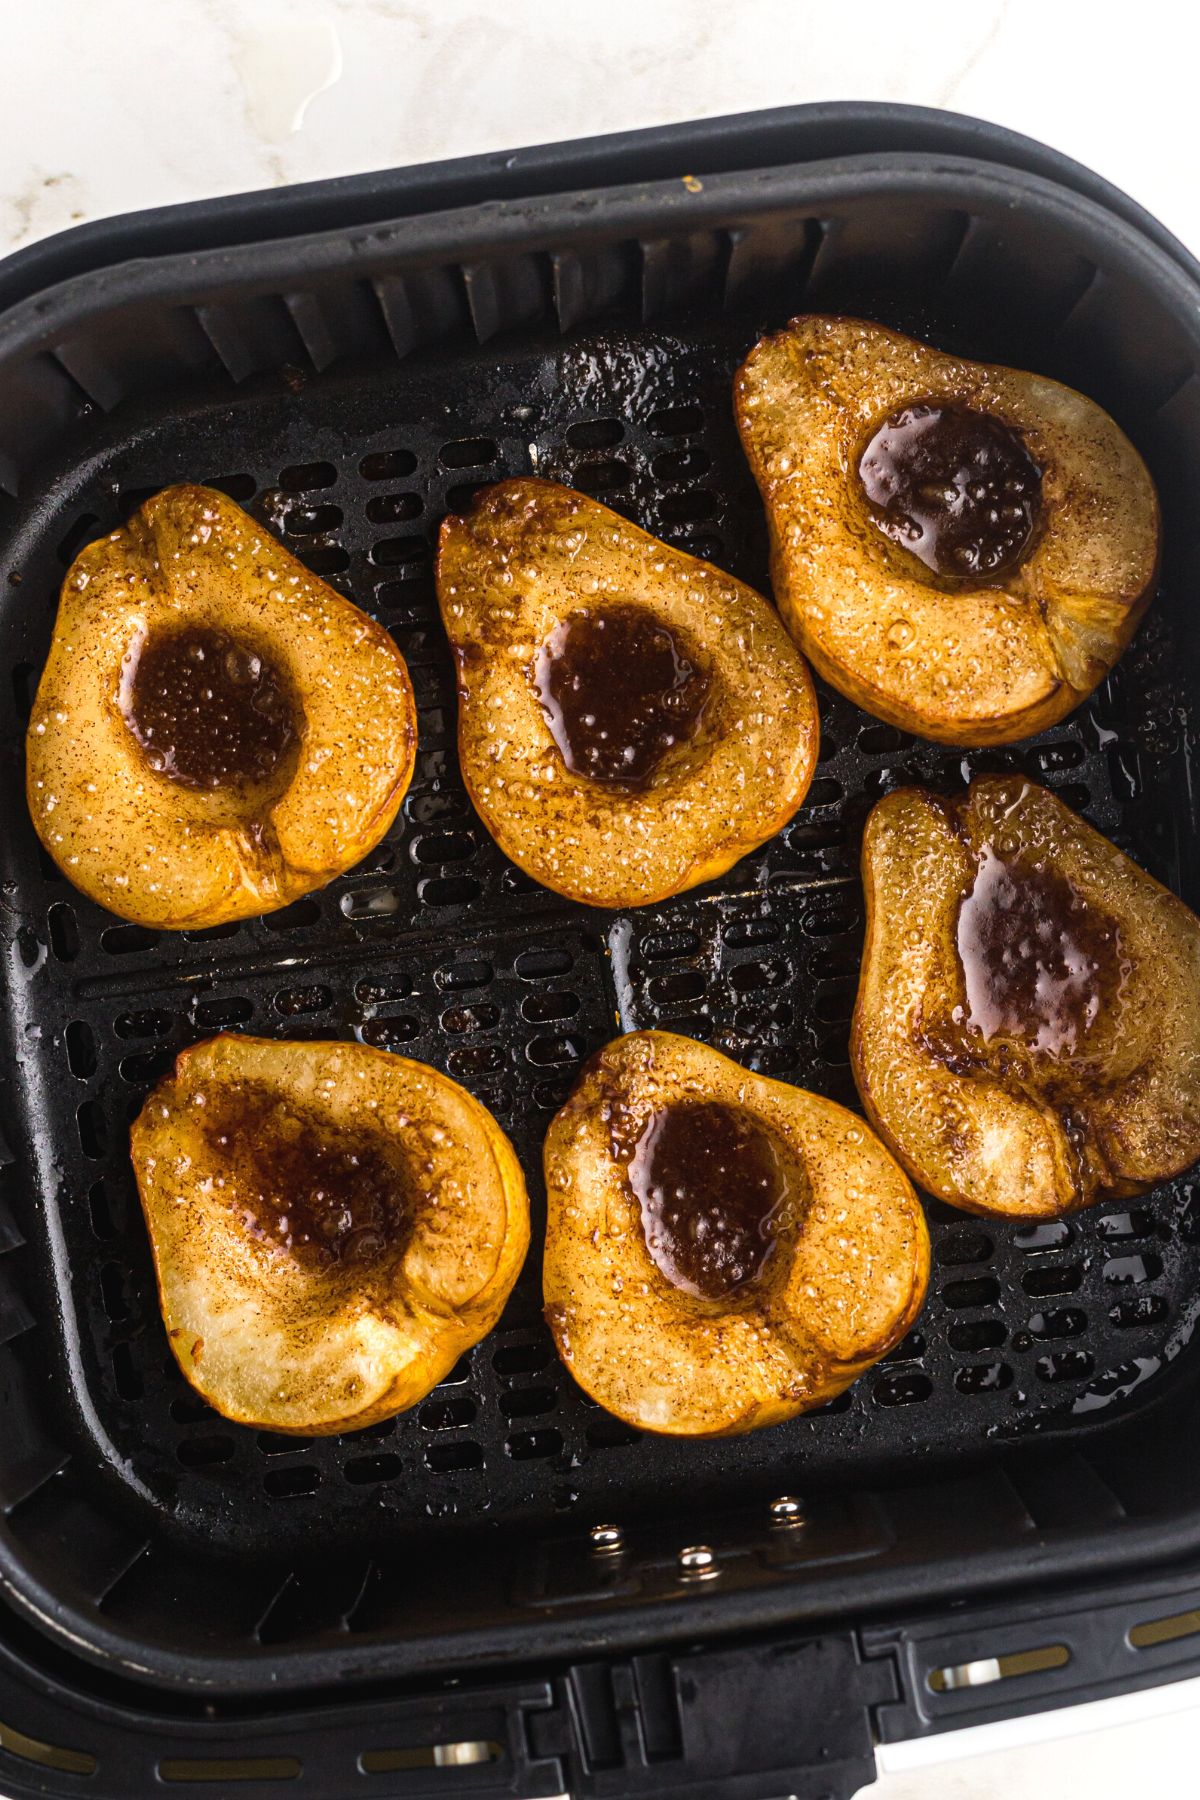 Juicy sliced pears with brown sugar and cinnamon mixture melted inside